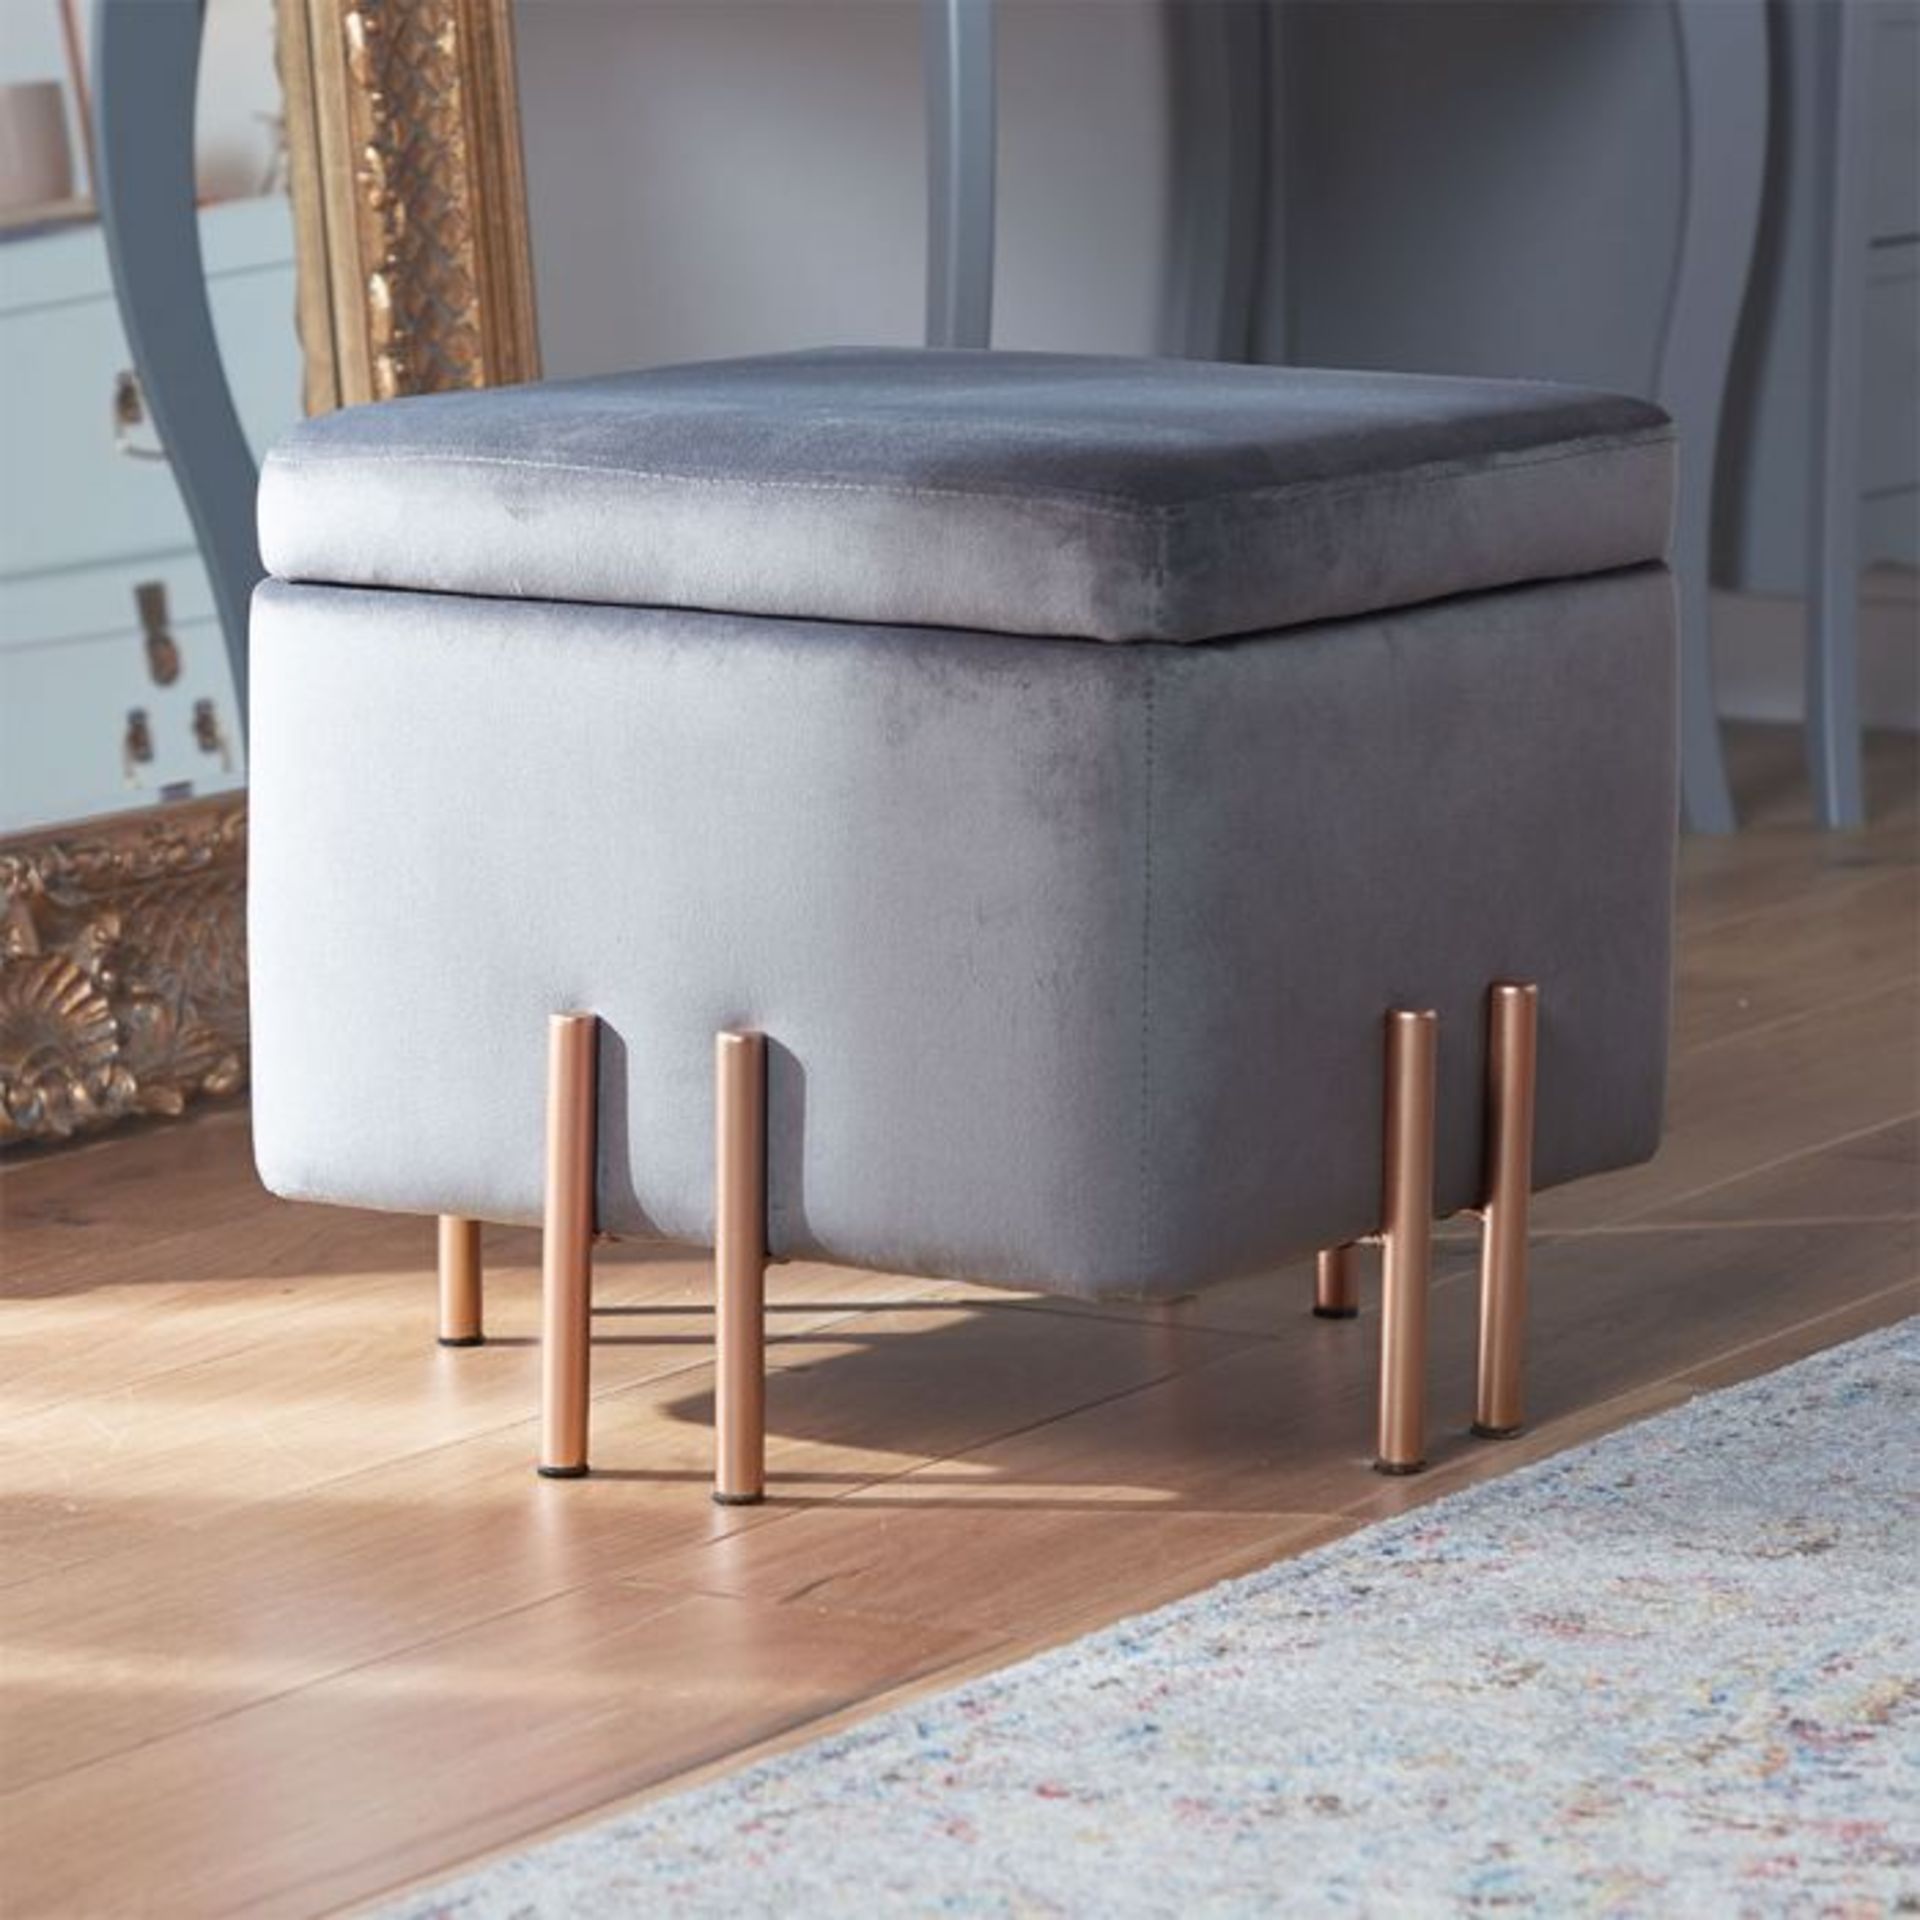 (S33) Grey Velvet Storage Stool As beautiful to look at as it is to sink into, the plush grey ... - Image 4 of 4